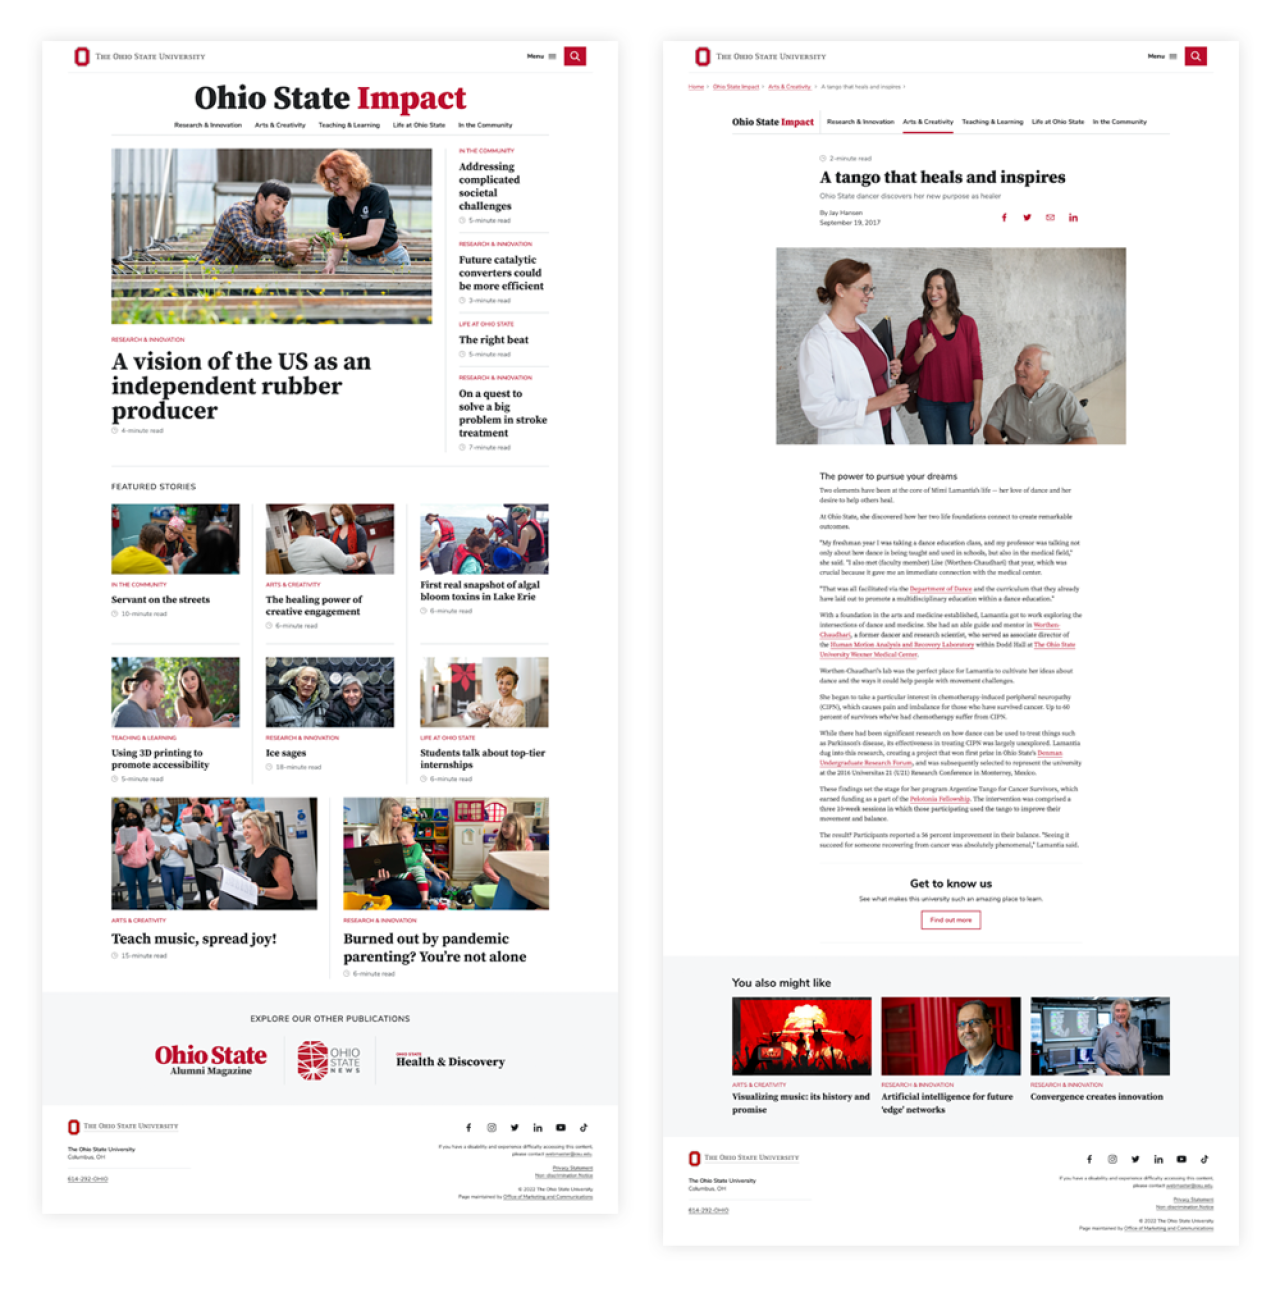 Screenshots of Ohio State Impact and story webpages.